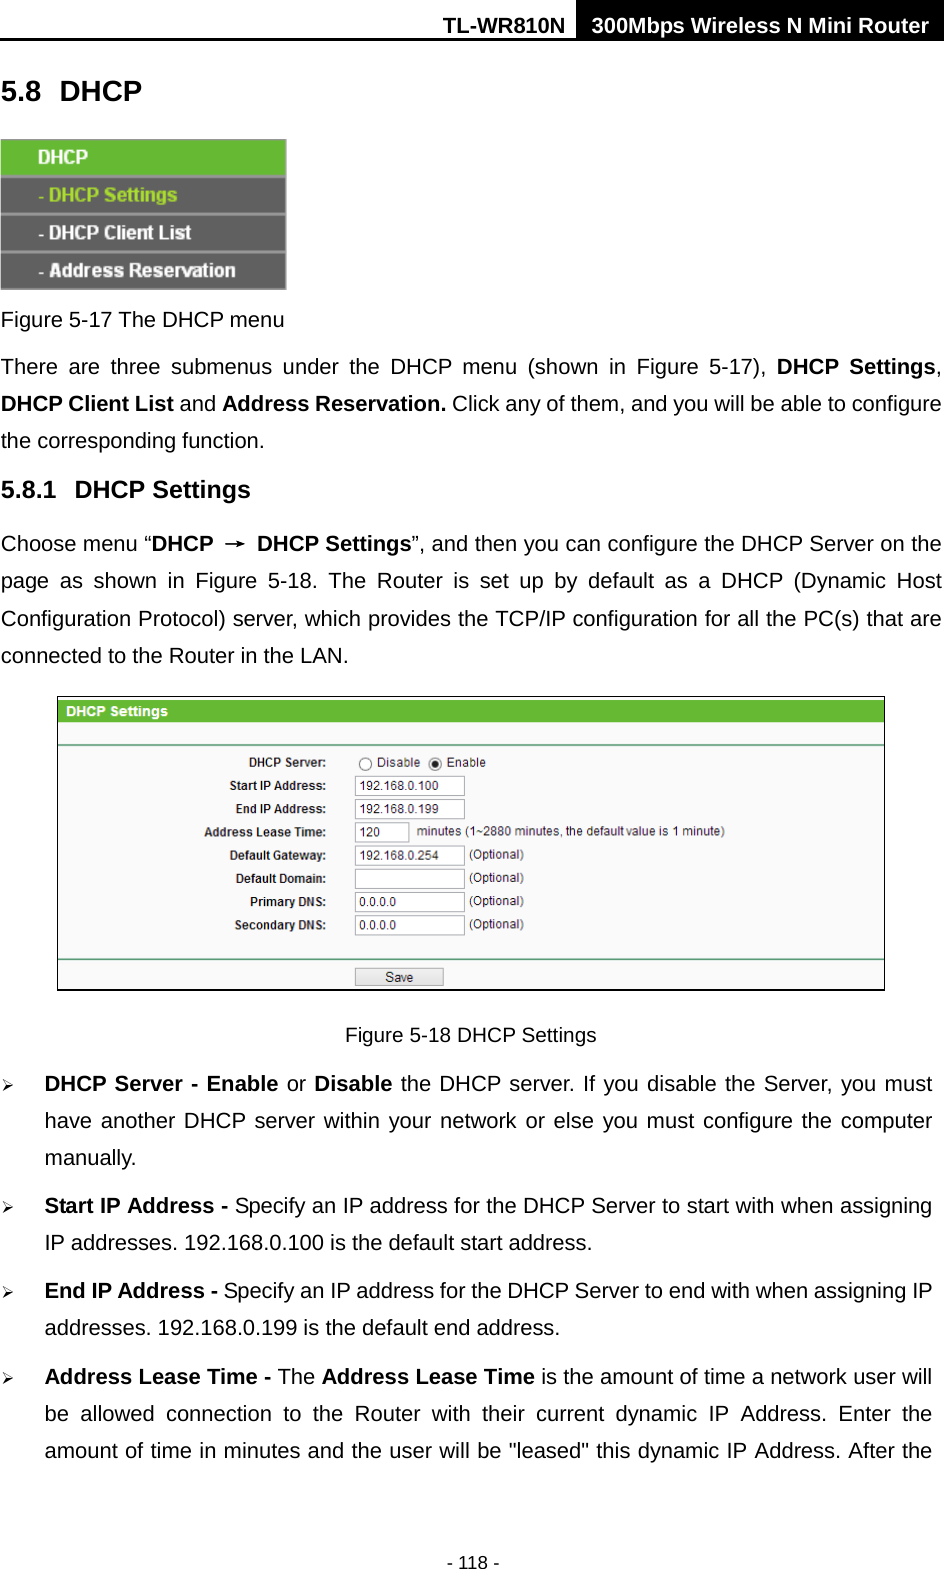 TL-WR810N 300Mbps Wireless N Mini Router  - 118 - 5.8 DHCP  Figure 5-17 The DHCP menu There are three submenus under the DHCP menu (shown in Figure  5-17),  DHCP Settings, DHCP Client List and Address Reservation. Click any of them, and you will be able to configure the corresponding function. 5.8.1 DHCP Settings Choose menu “DHCP → DHCP Settings”, and then you can configure the DHCP Server on the page  as  shown in Figure  5-18.  The  Router is set up by default as a DHCP (Dynamic Host Configuration Protocol) server, which provides the TCP/IP configuration for all the PC(s) that are connected to the Router in the LAN.    Figure 5-18 DHCP Settings  DHCP Server - Enable or Disable the DHCP server. If you disable the Server, you must have another DHCP server within your network or else you must configure the computer manually.  Start IP Address - Specify an IP address for the DHCP Server to start with when assigning IP addresses. 192.168.0.100 is the default start address.  End IP Address - Specify an IP address for the DHCP Server to end with when assigning IP addresses. 192.168.0.199 is the default end address.  Address Lease Time - The Address Lease Time is the amount of time a network user will be allowed connection to the Router with their current dynamic IP Address. Enter the amount of time in minutes and the user will be &quot;leased&quot; this dynamic IP Address. After the 